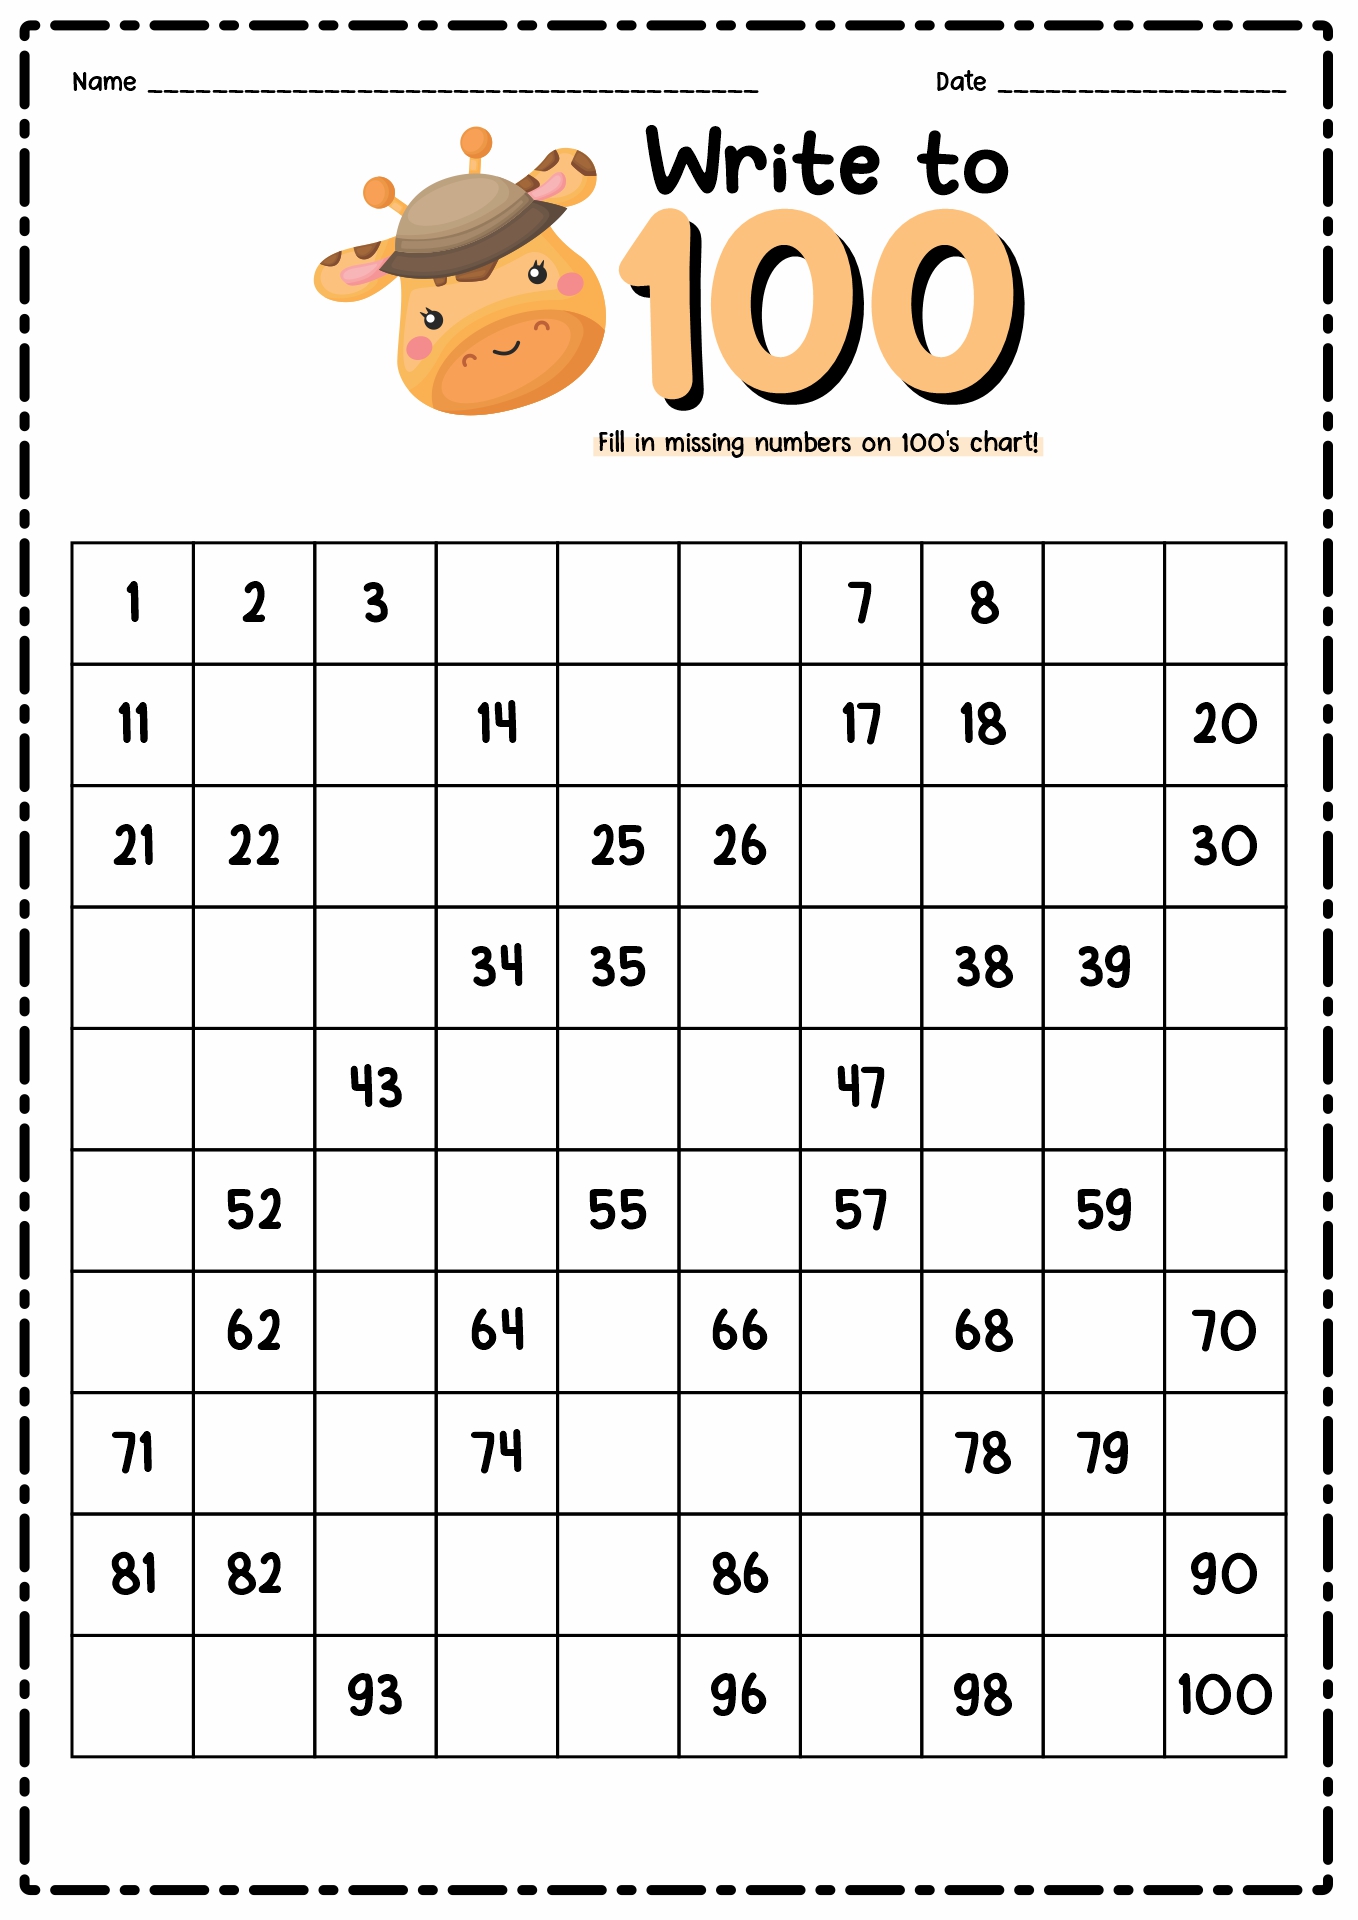 Printable Hundreds Chart with Missing Numbers Image